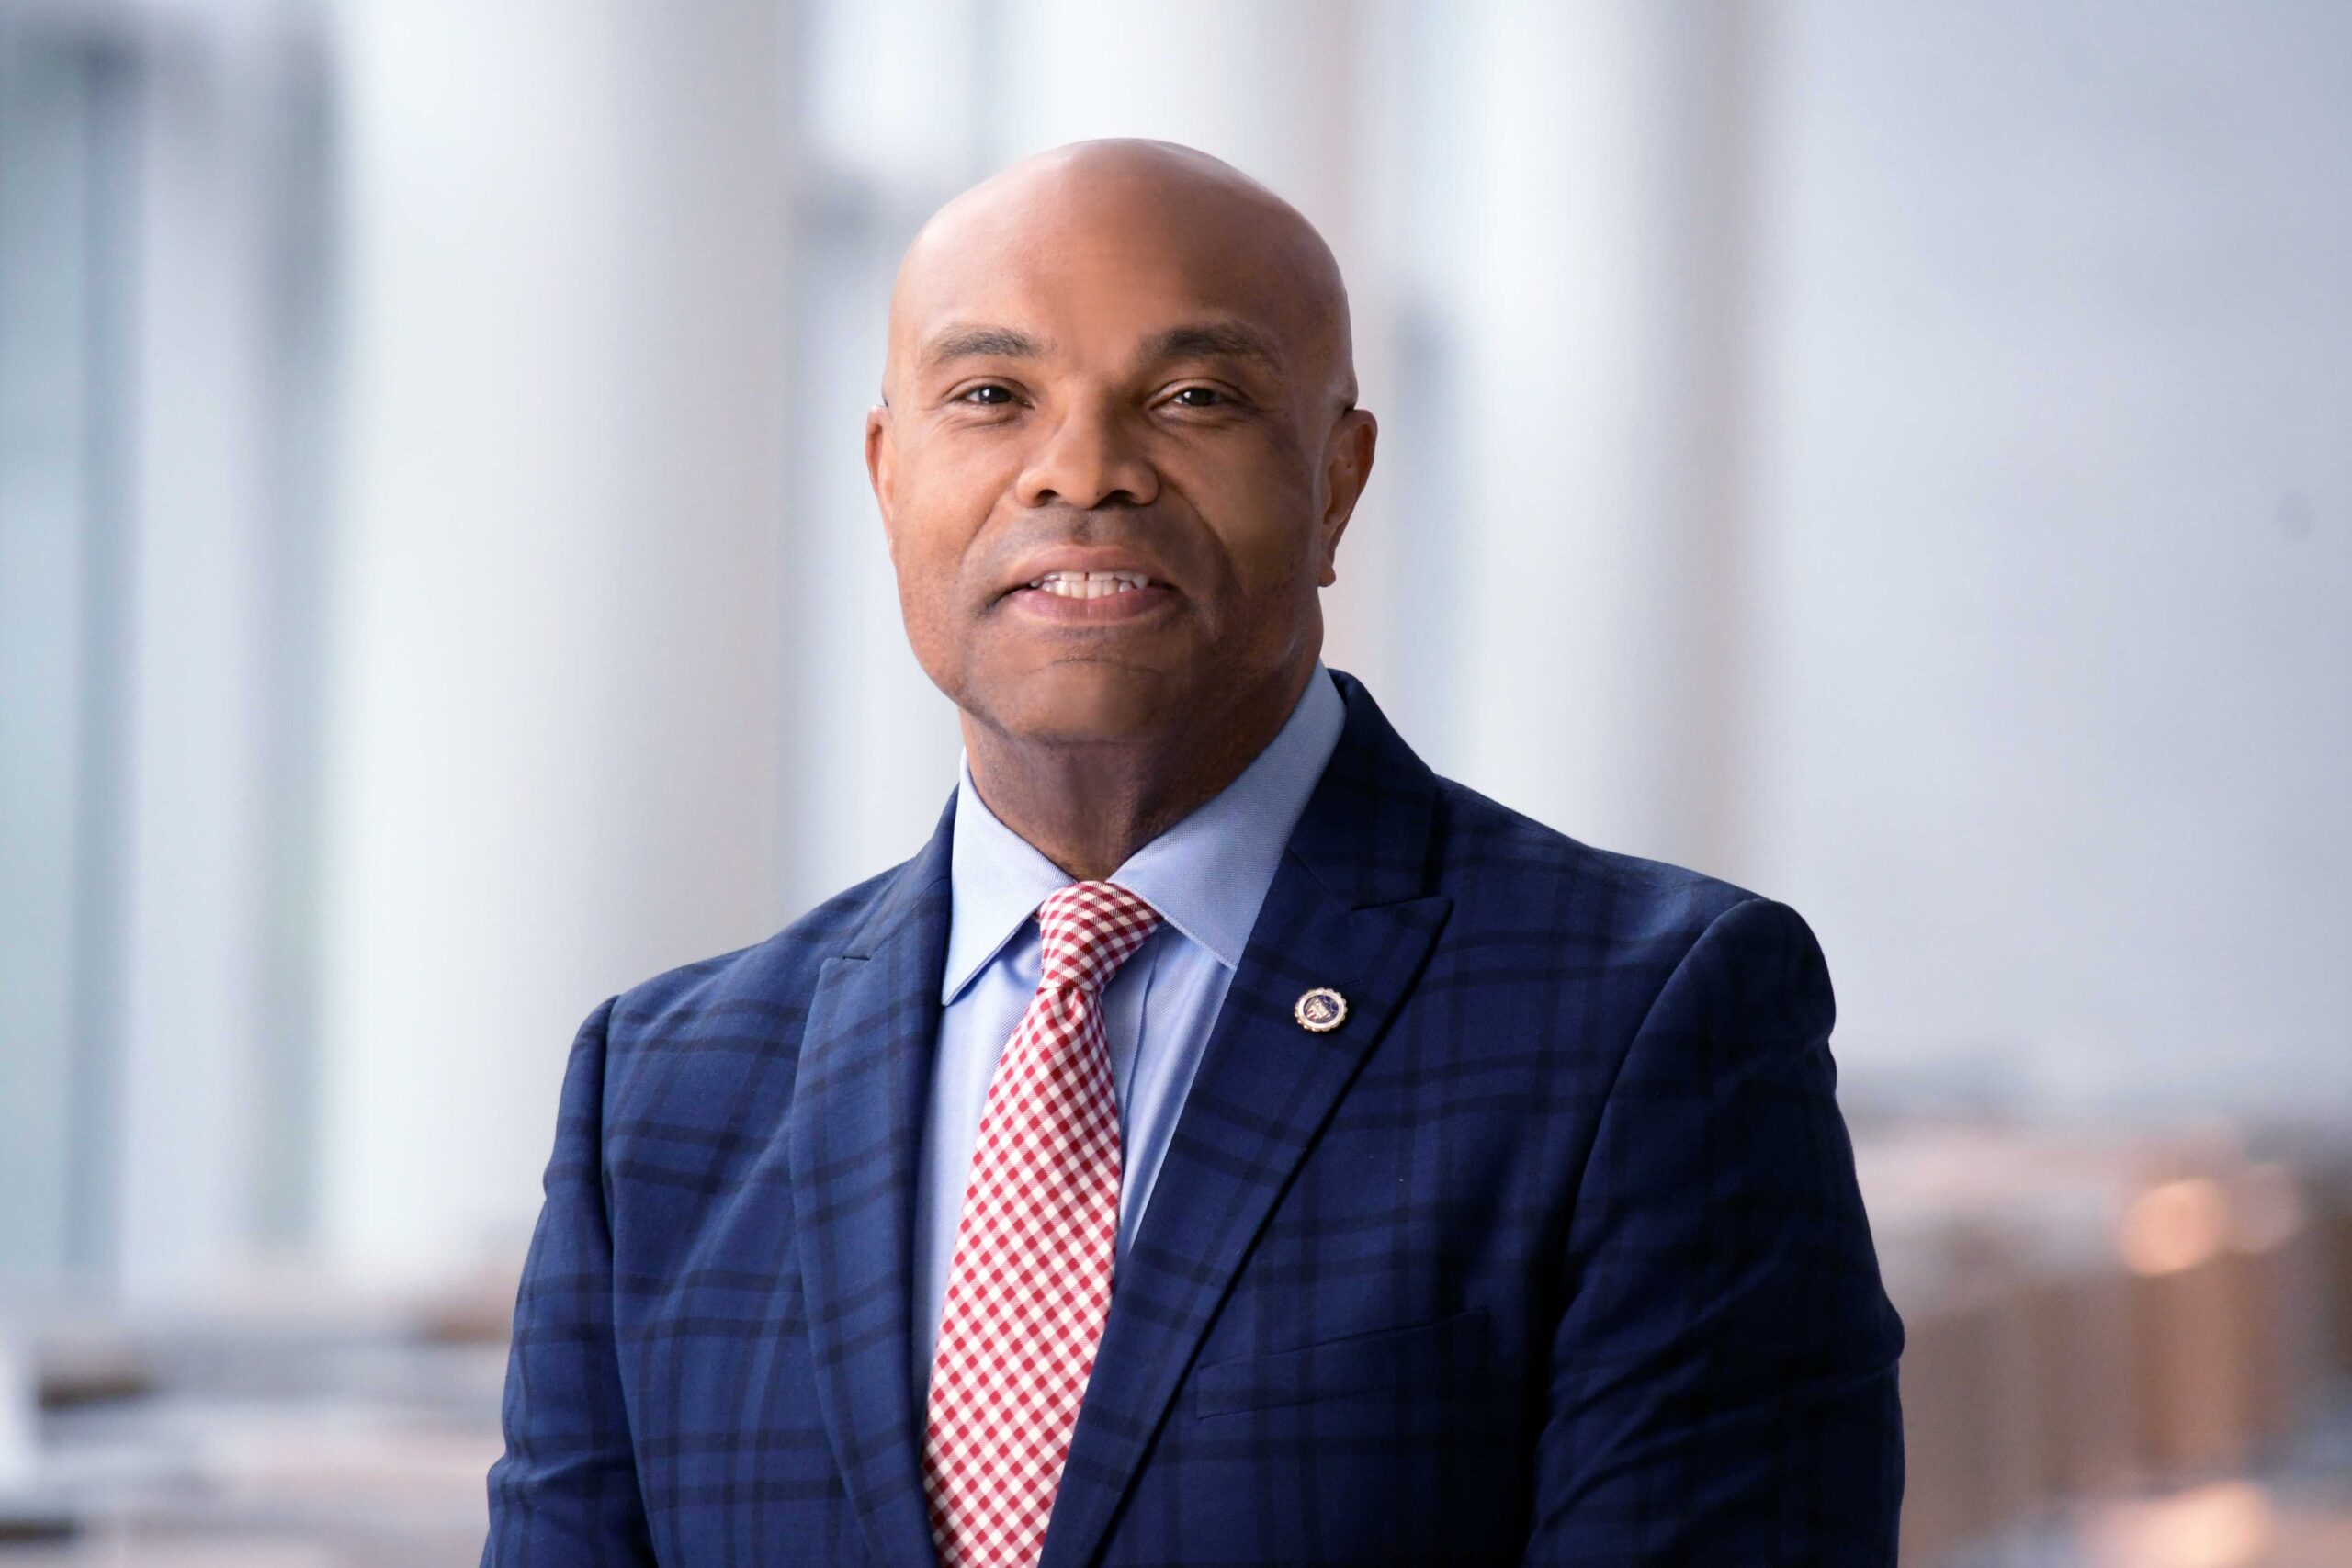 The International African American Museum names Grady L. Crosby as board chair